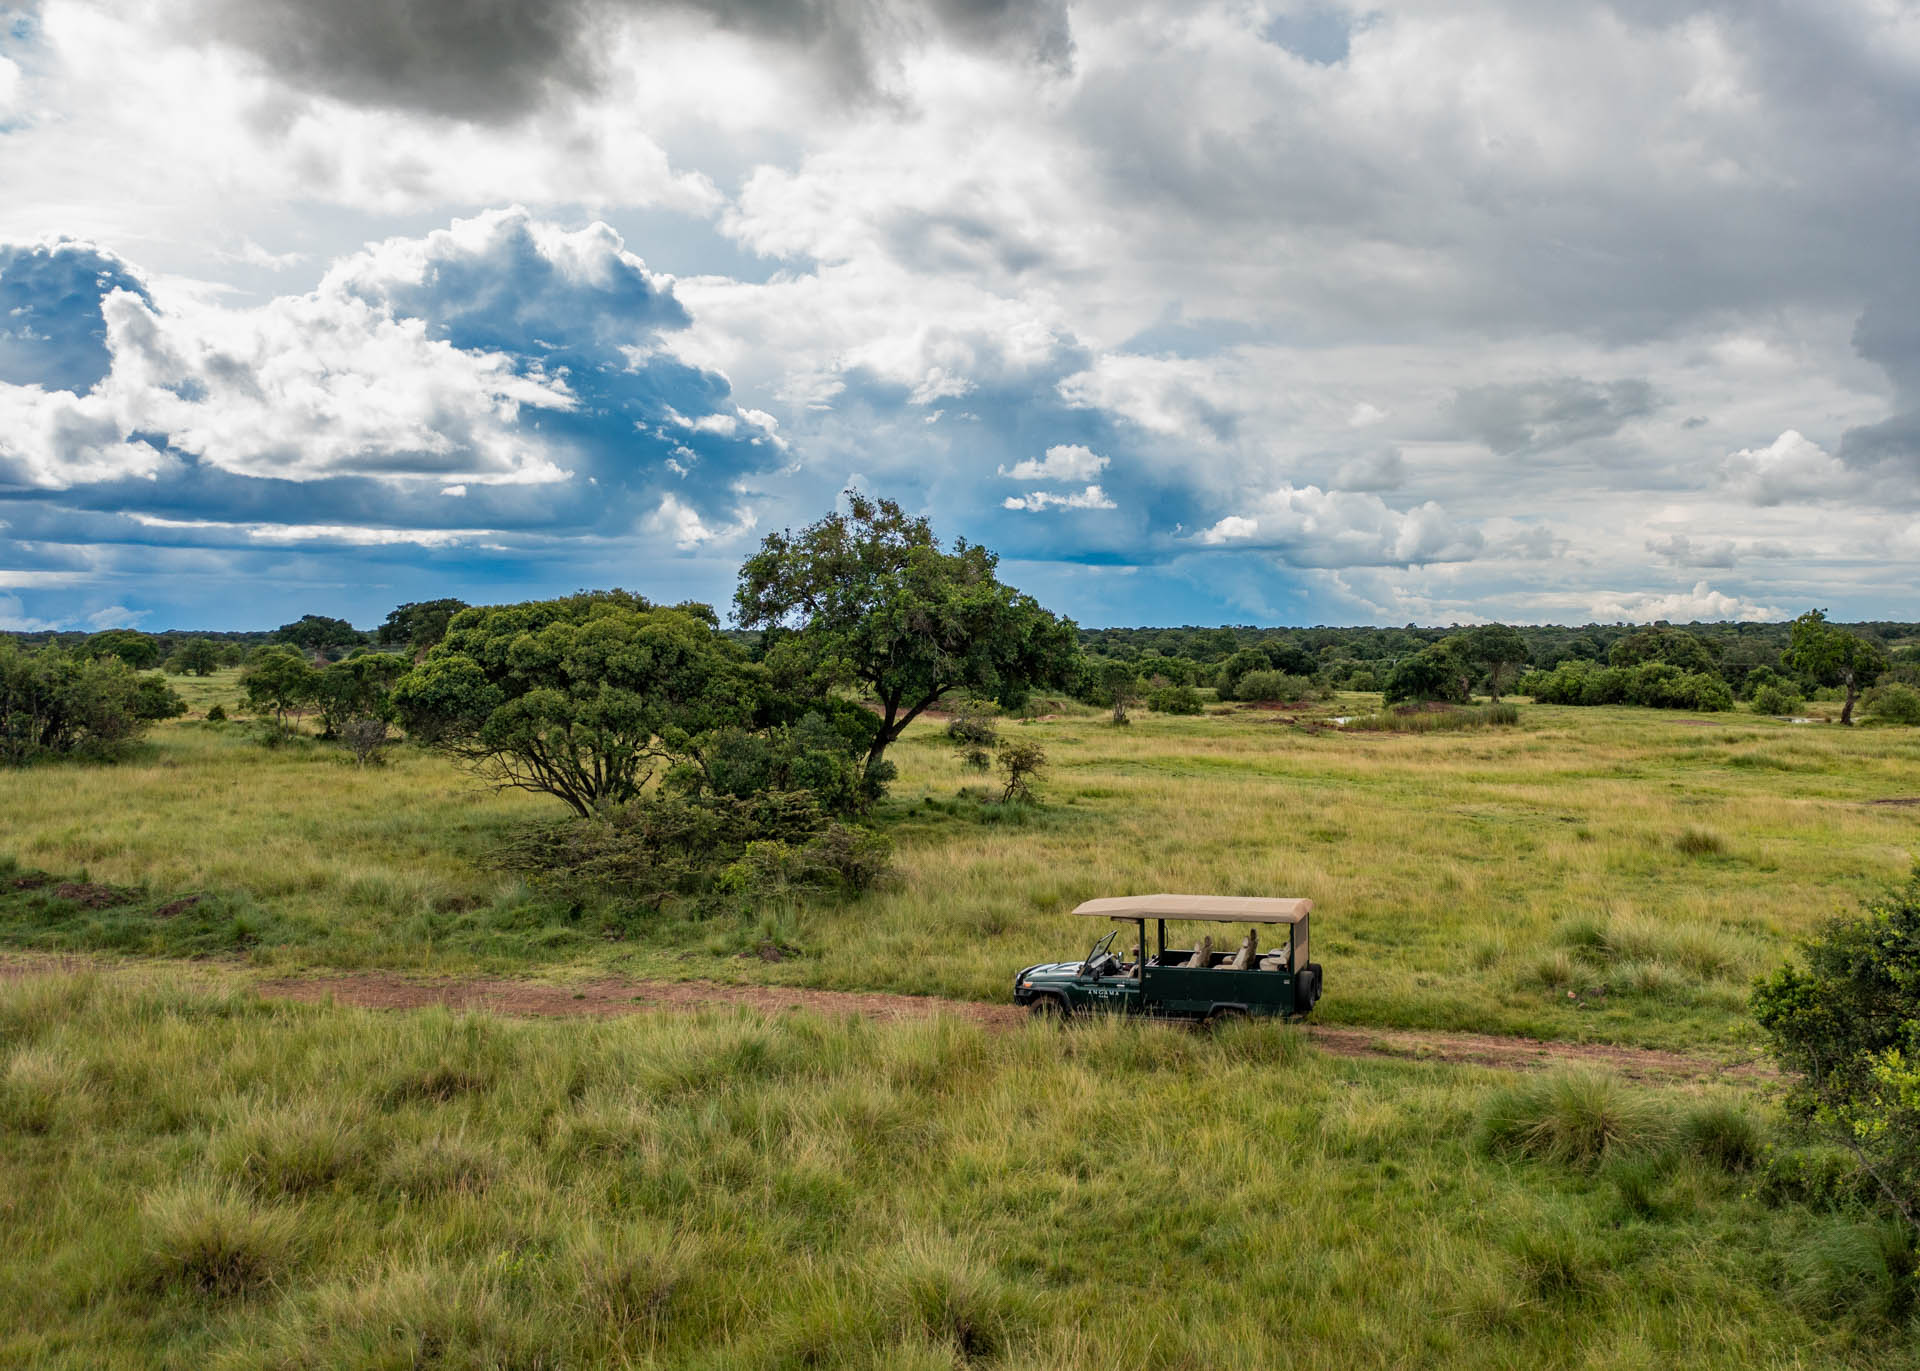 The very best way to explore the Mara Triangle 